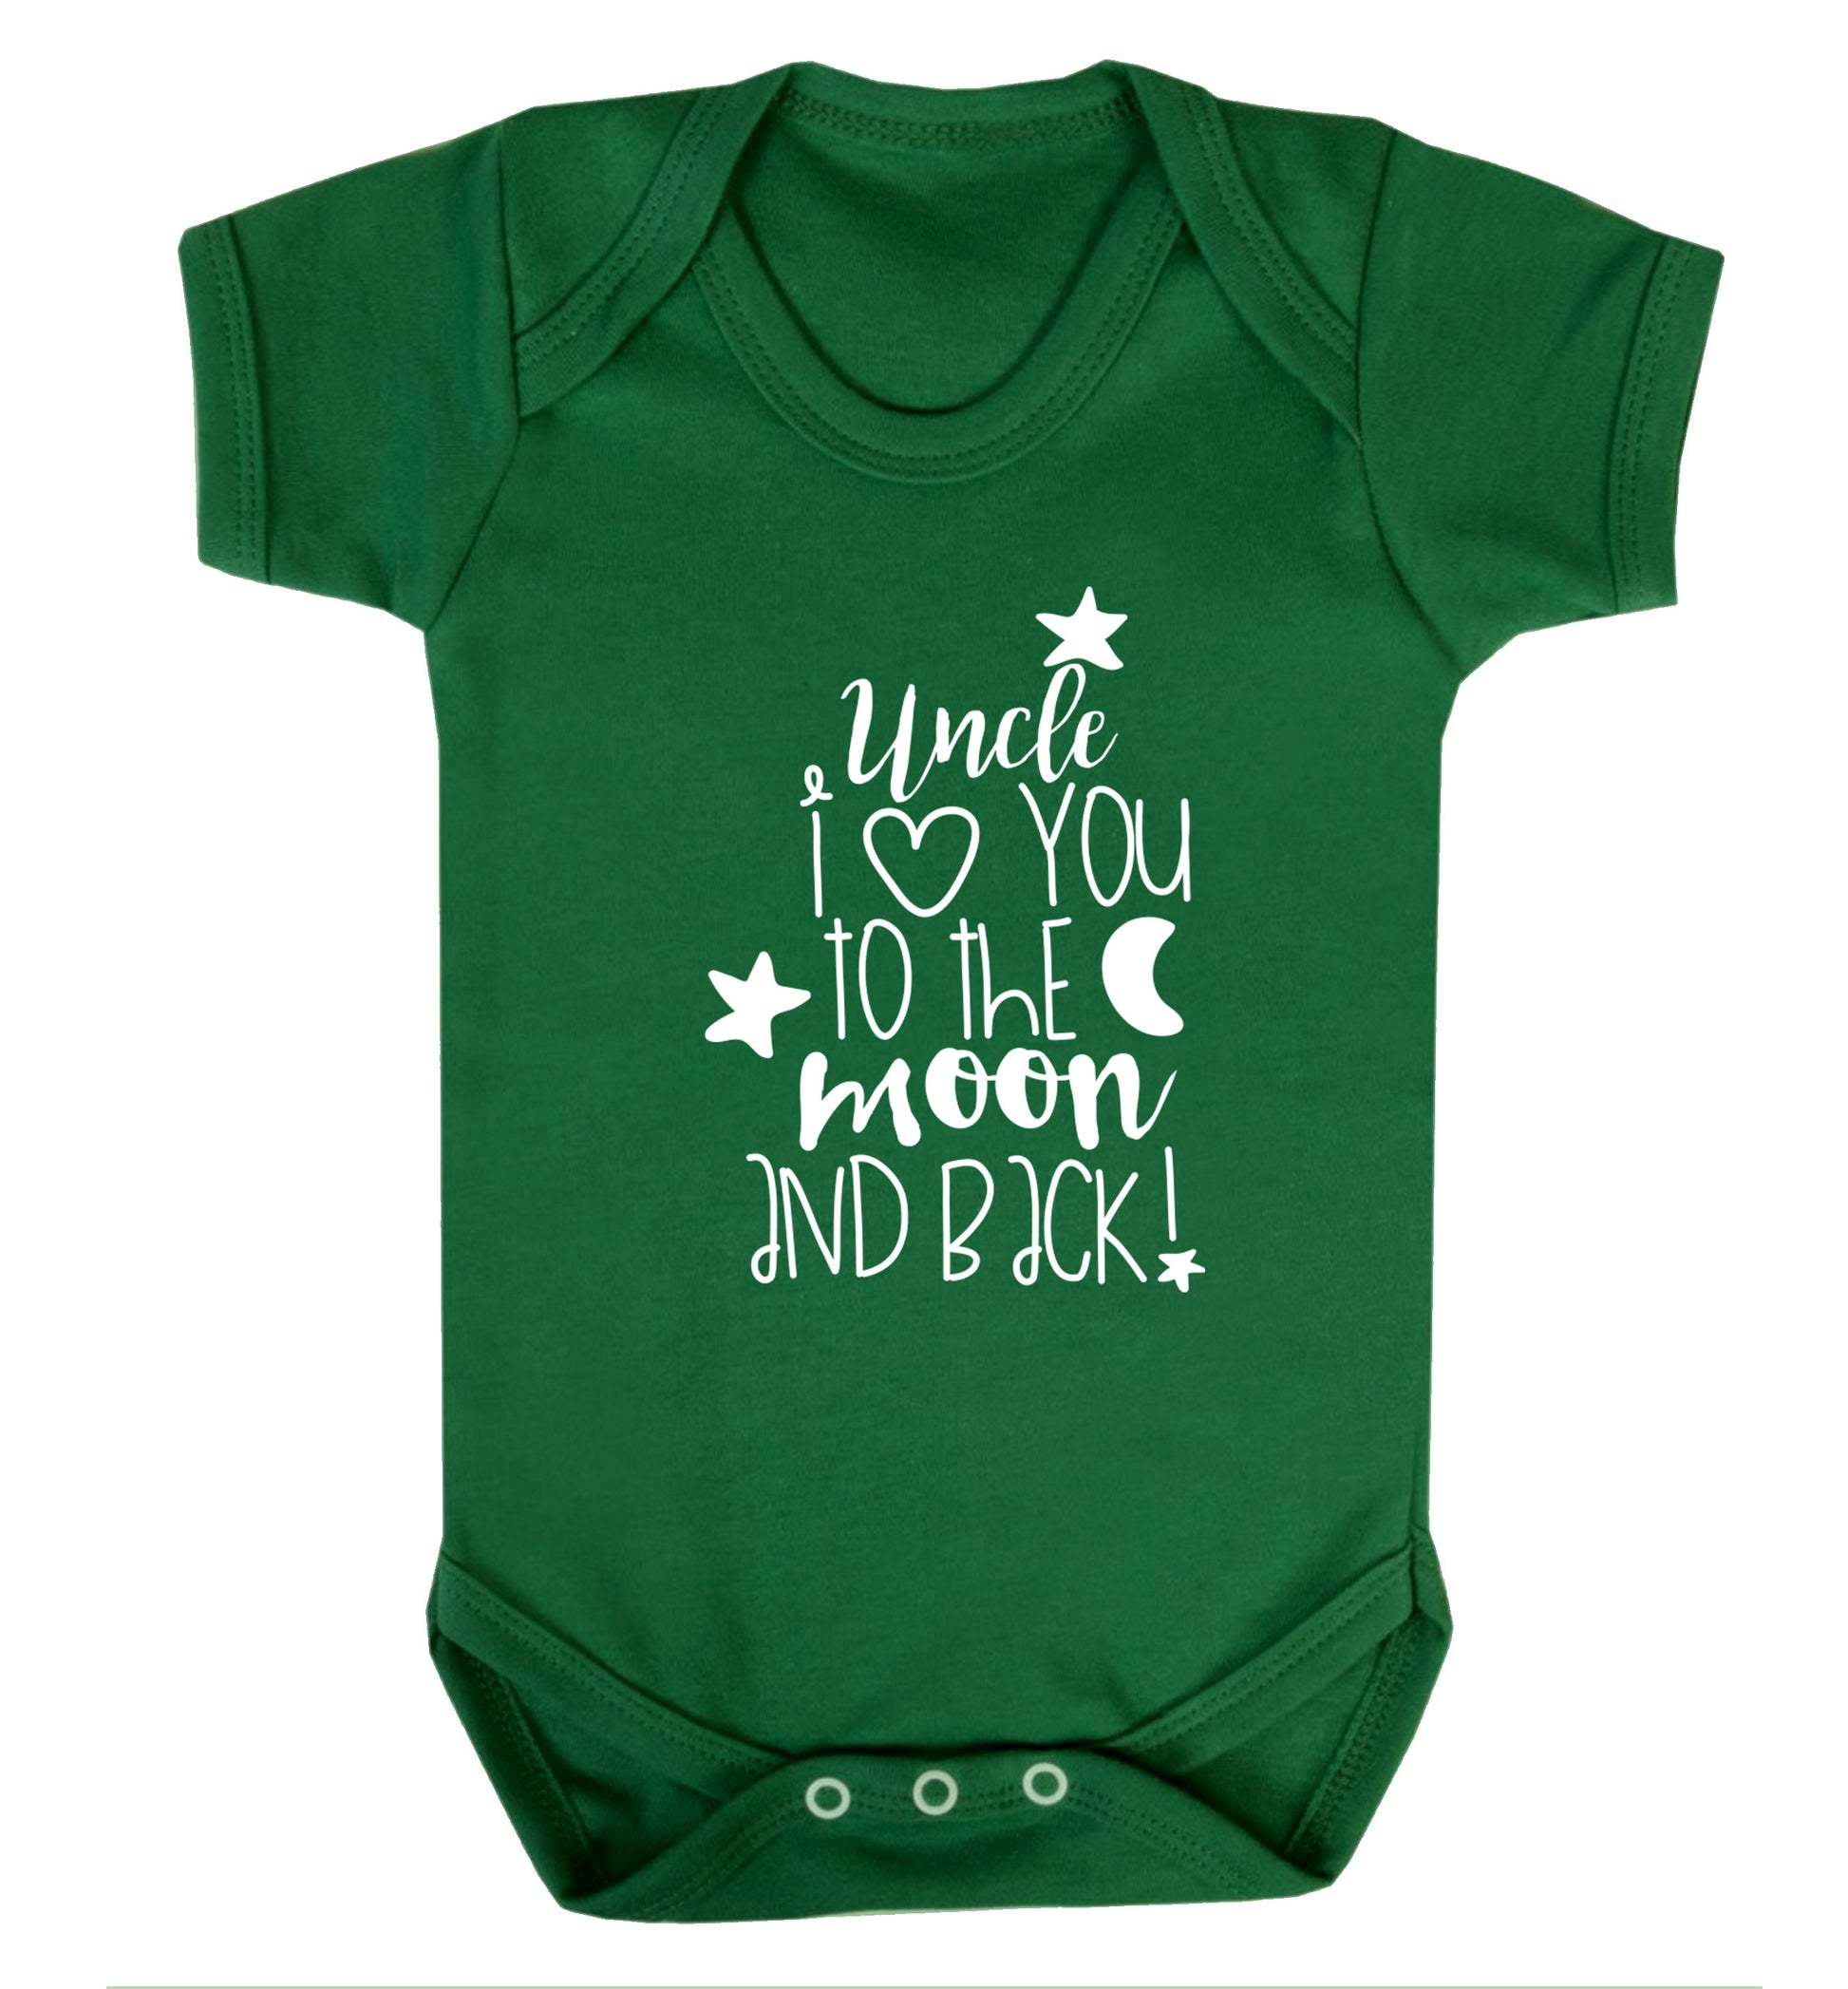 Uncle I love you to the moon and back Baby Vest green 18-24 months